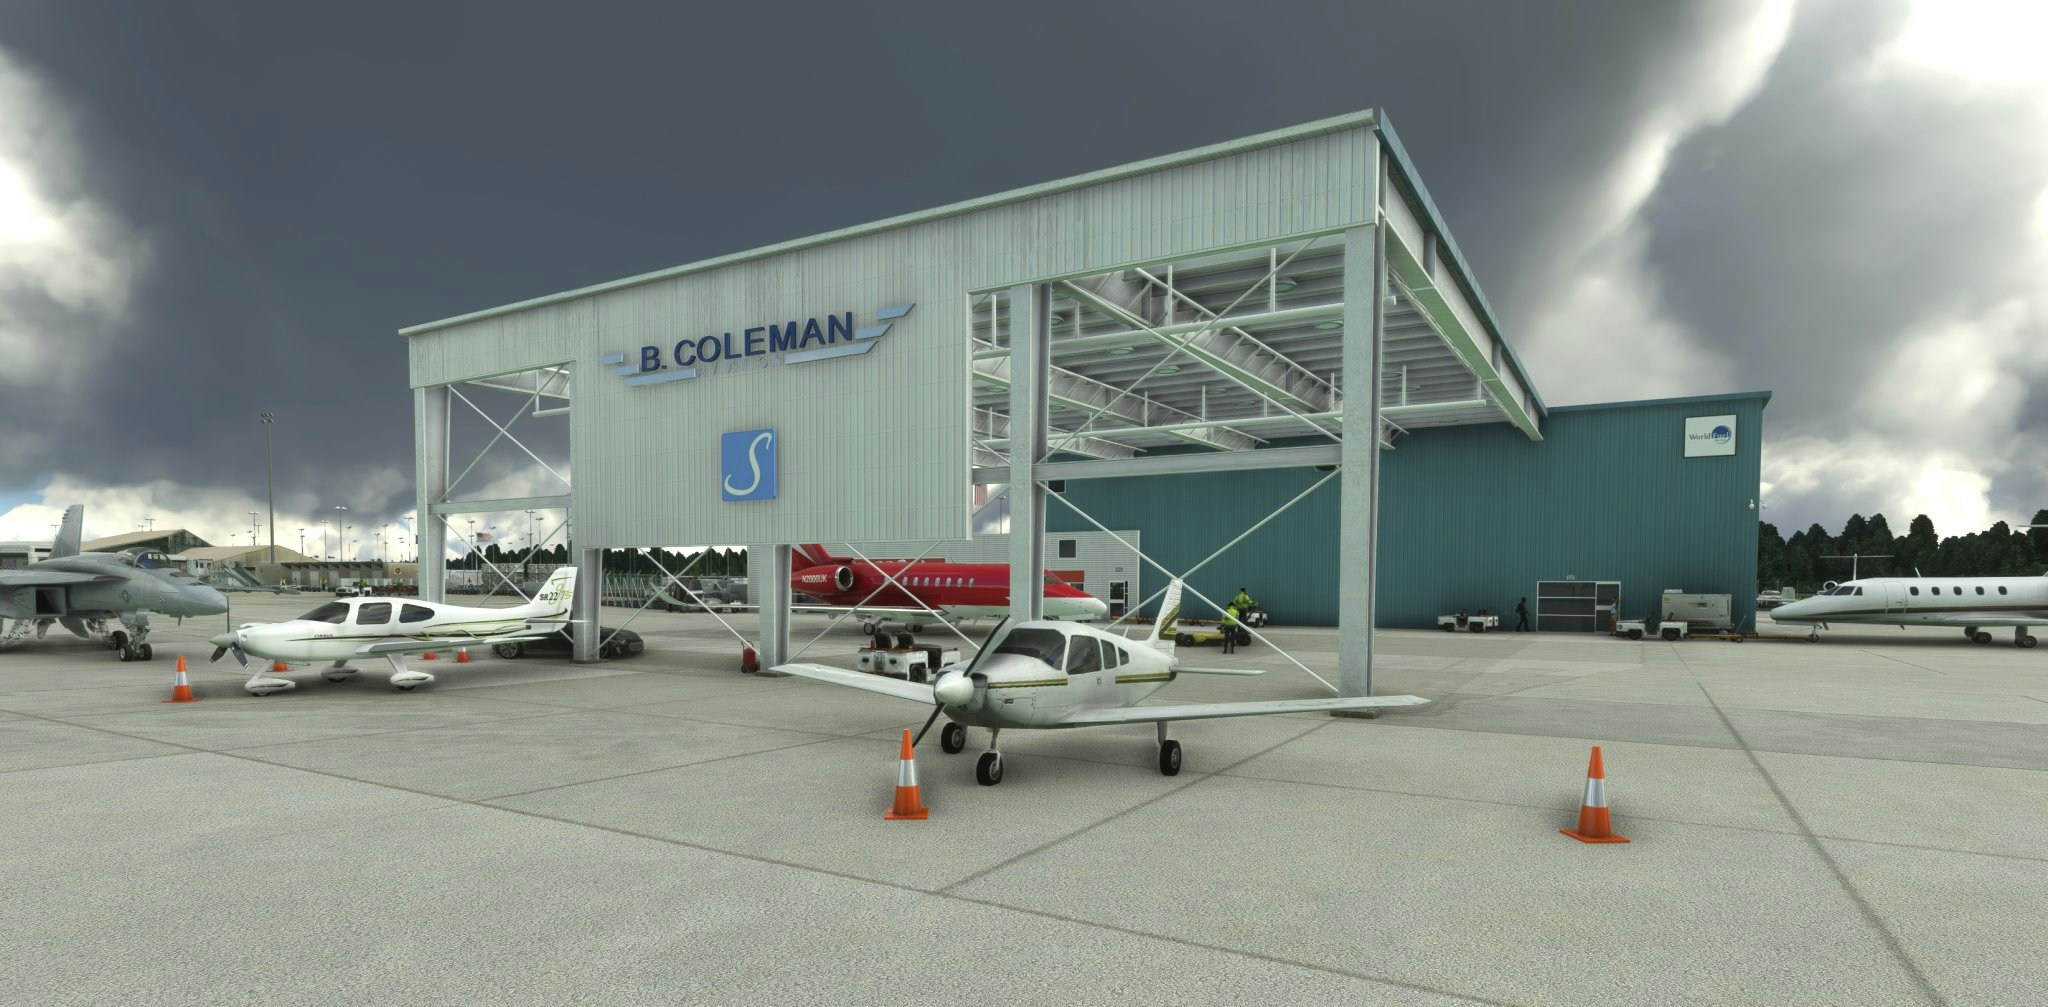 UK2000 Scenery Releases Gary Airport for MSFS